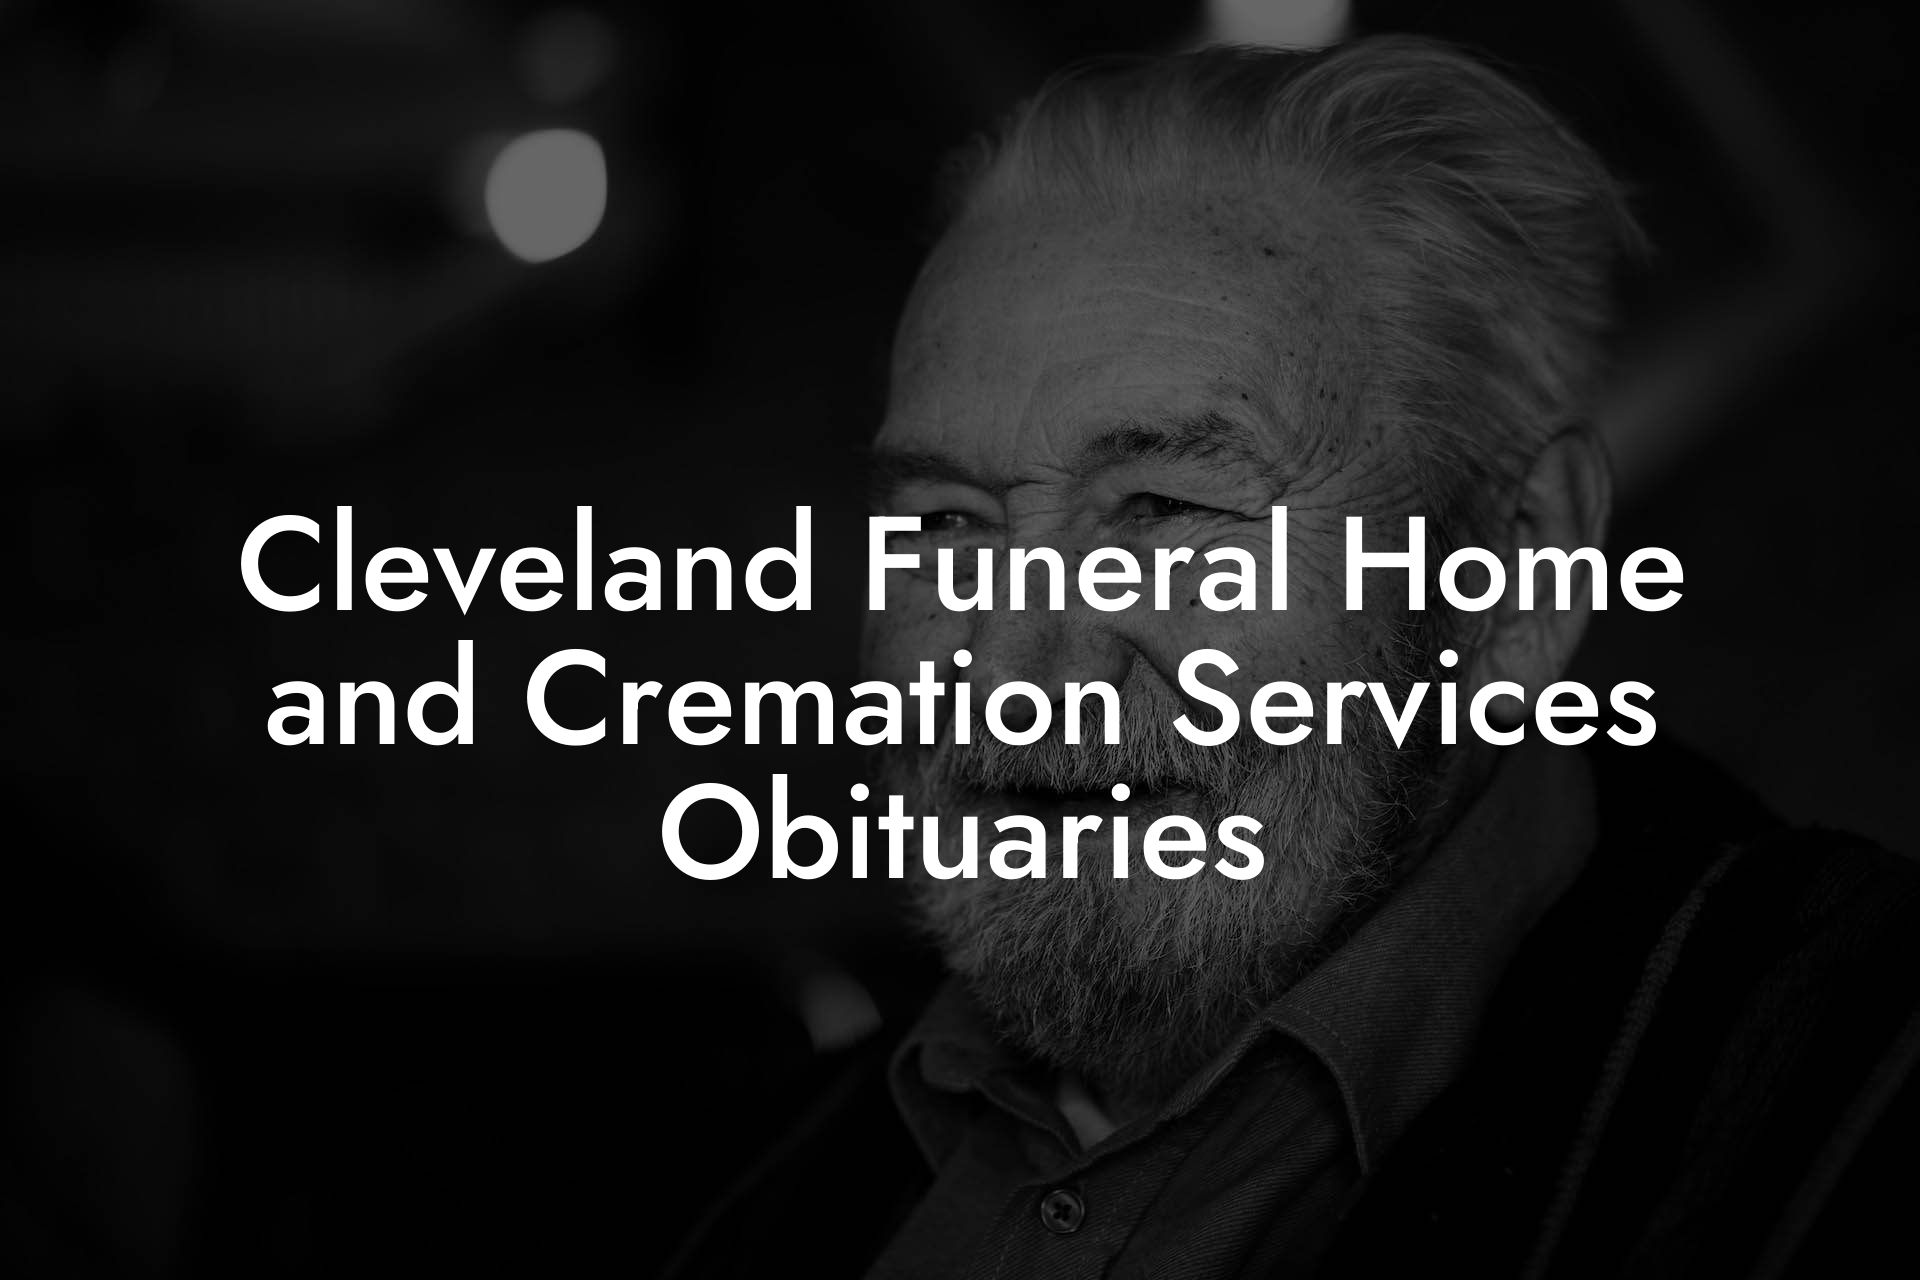 Cleveland Funeral Home and Cremation Services Obituaries